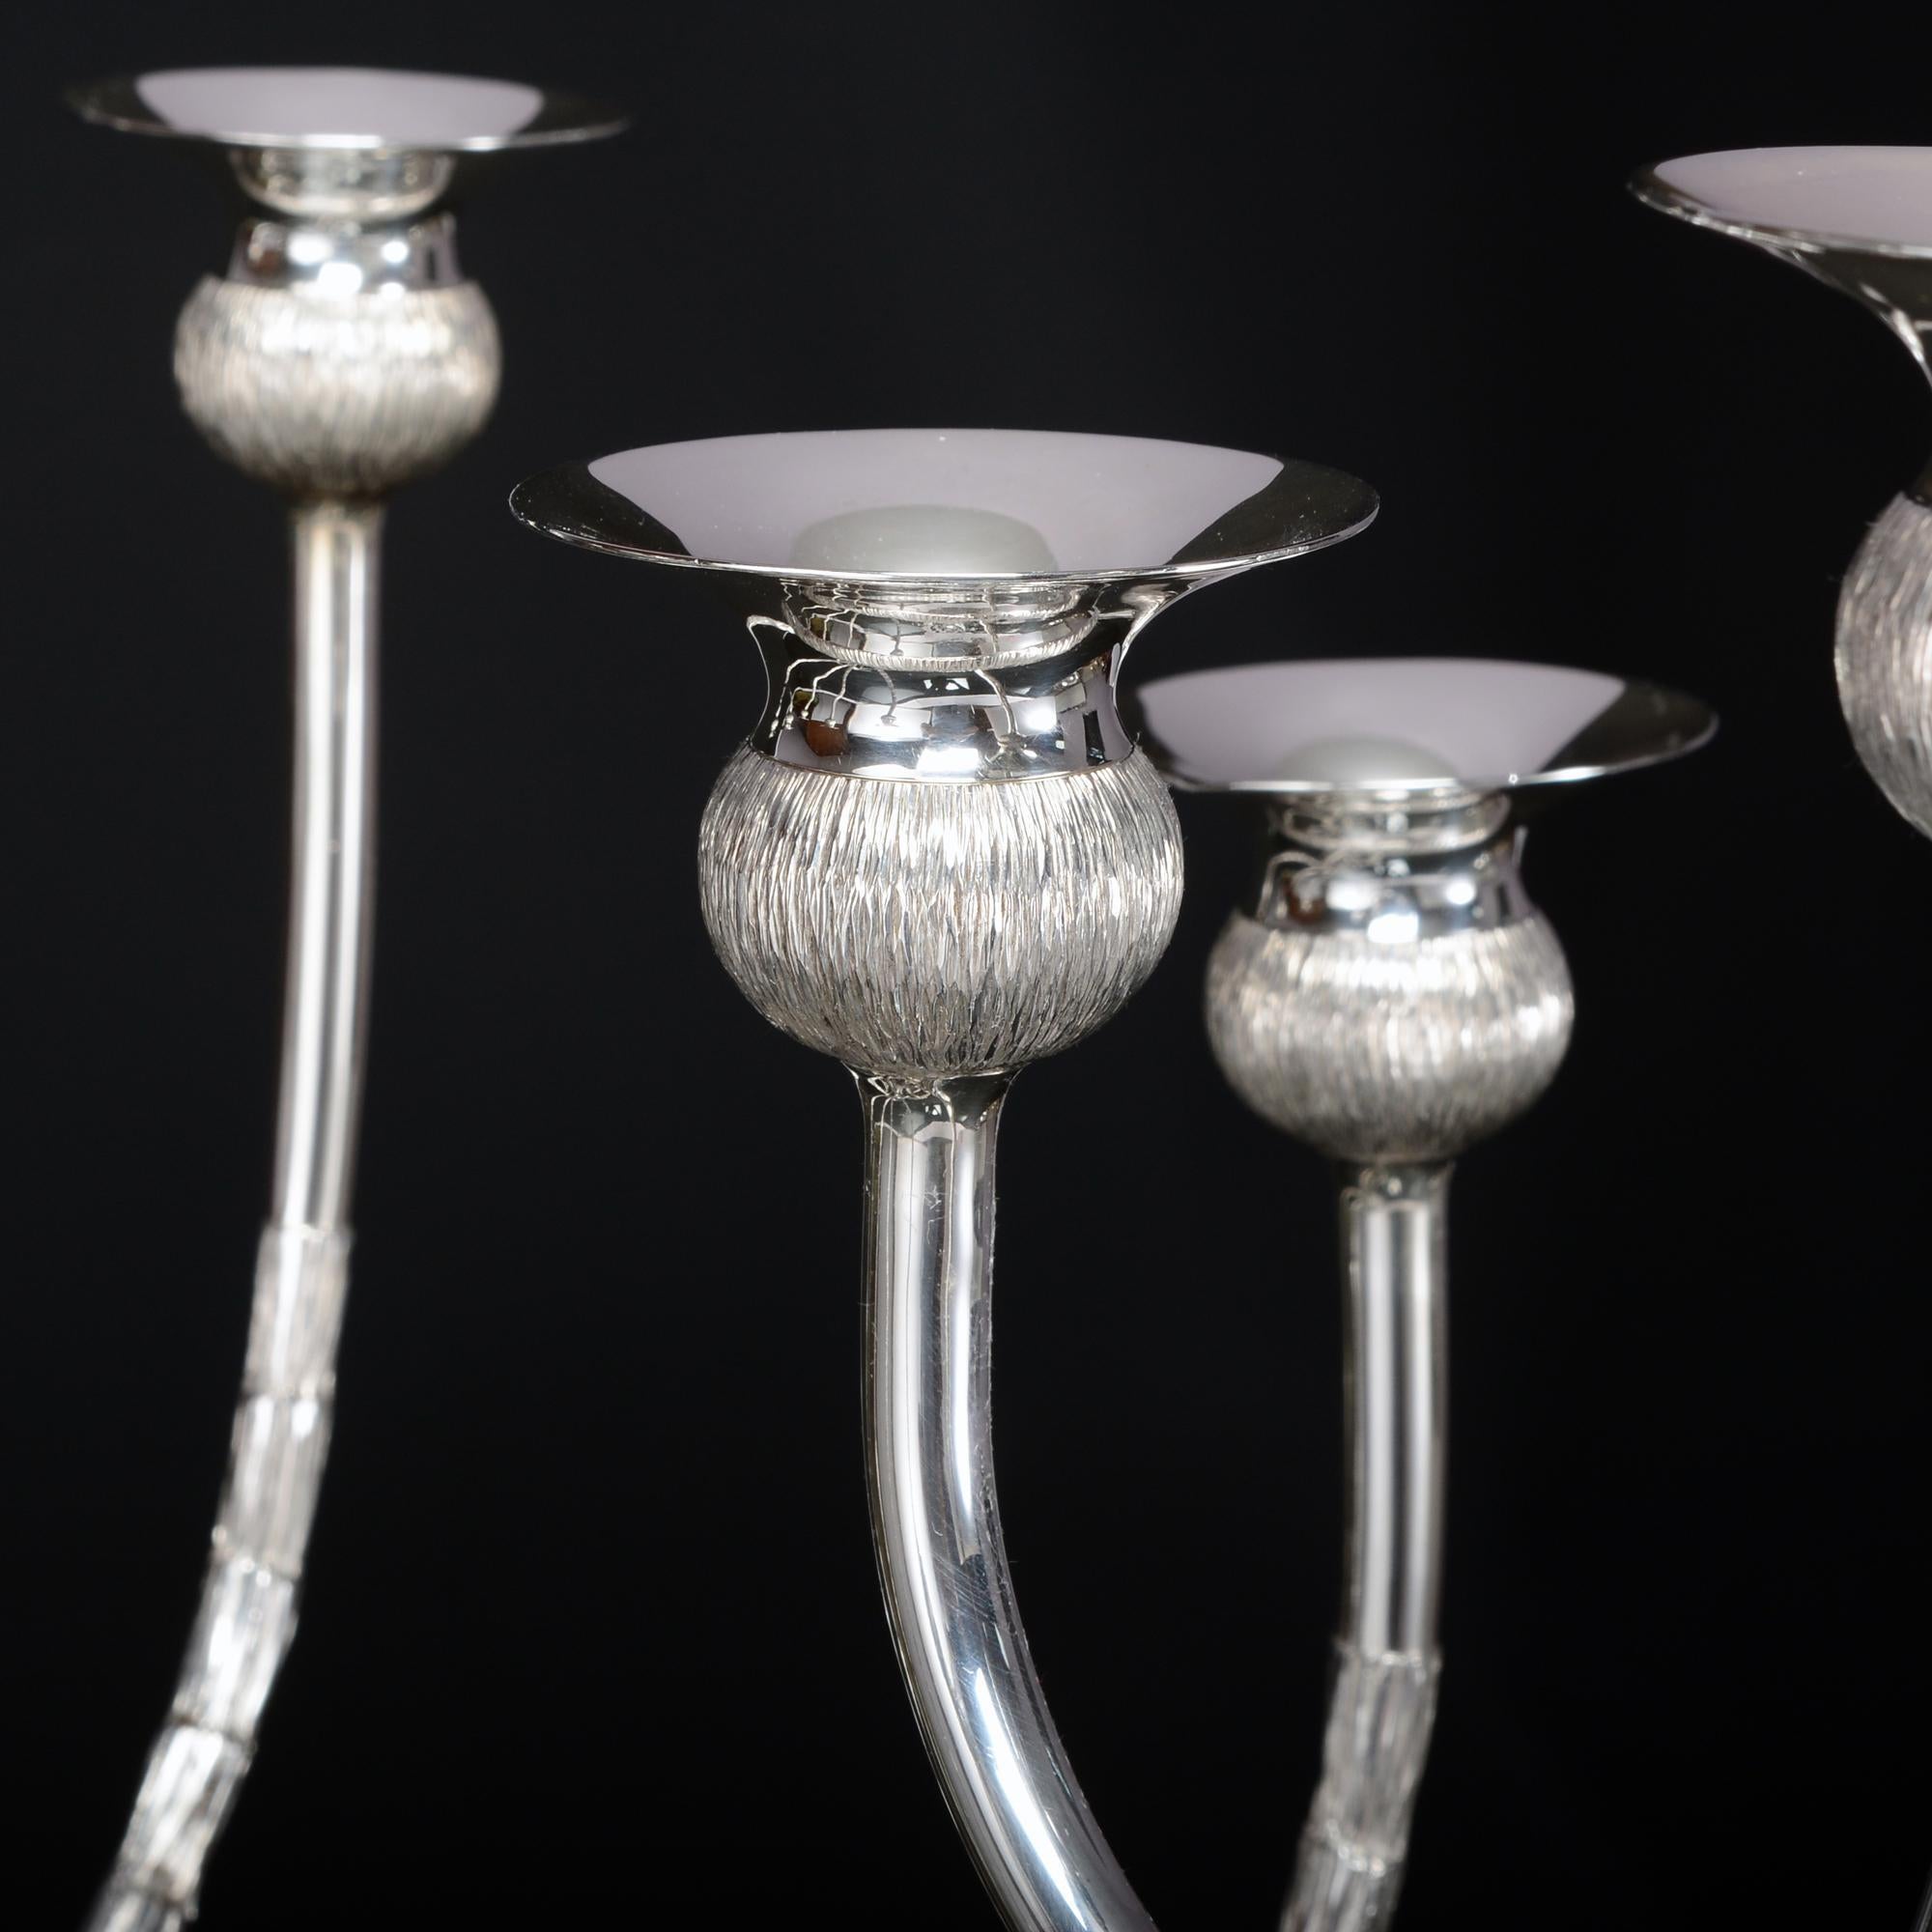 An impressive and unique silver nine-light candelabrum or centrepiece made by the prominent and highly regarded 20th century silversmith, Gerald Benney, in 1976.

The silver candelabrum is formed as seven thistle stems converging to form a sphere